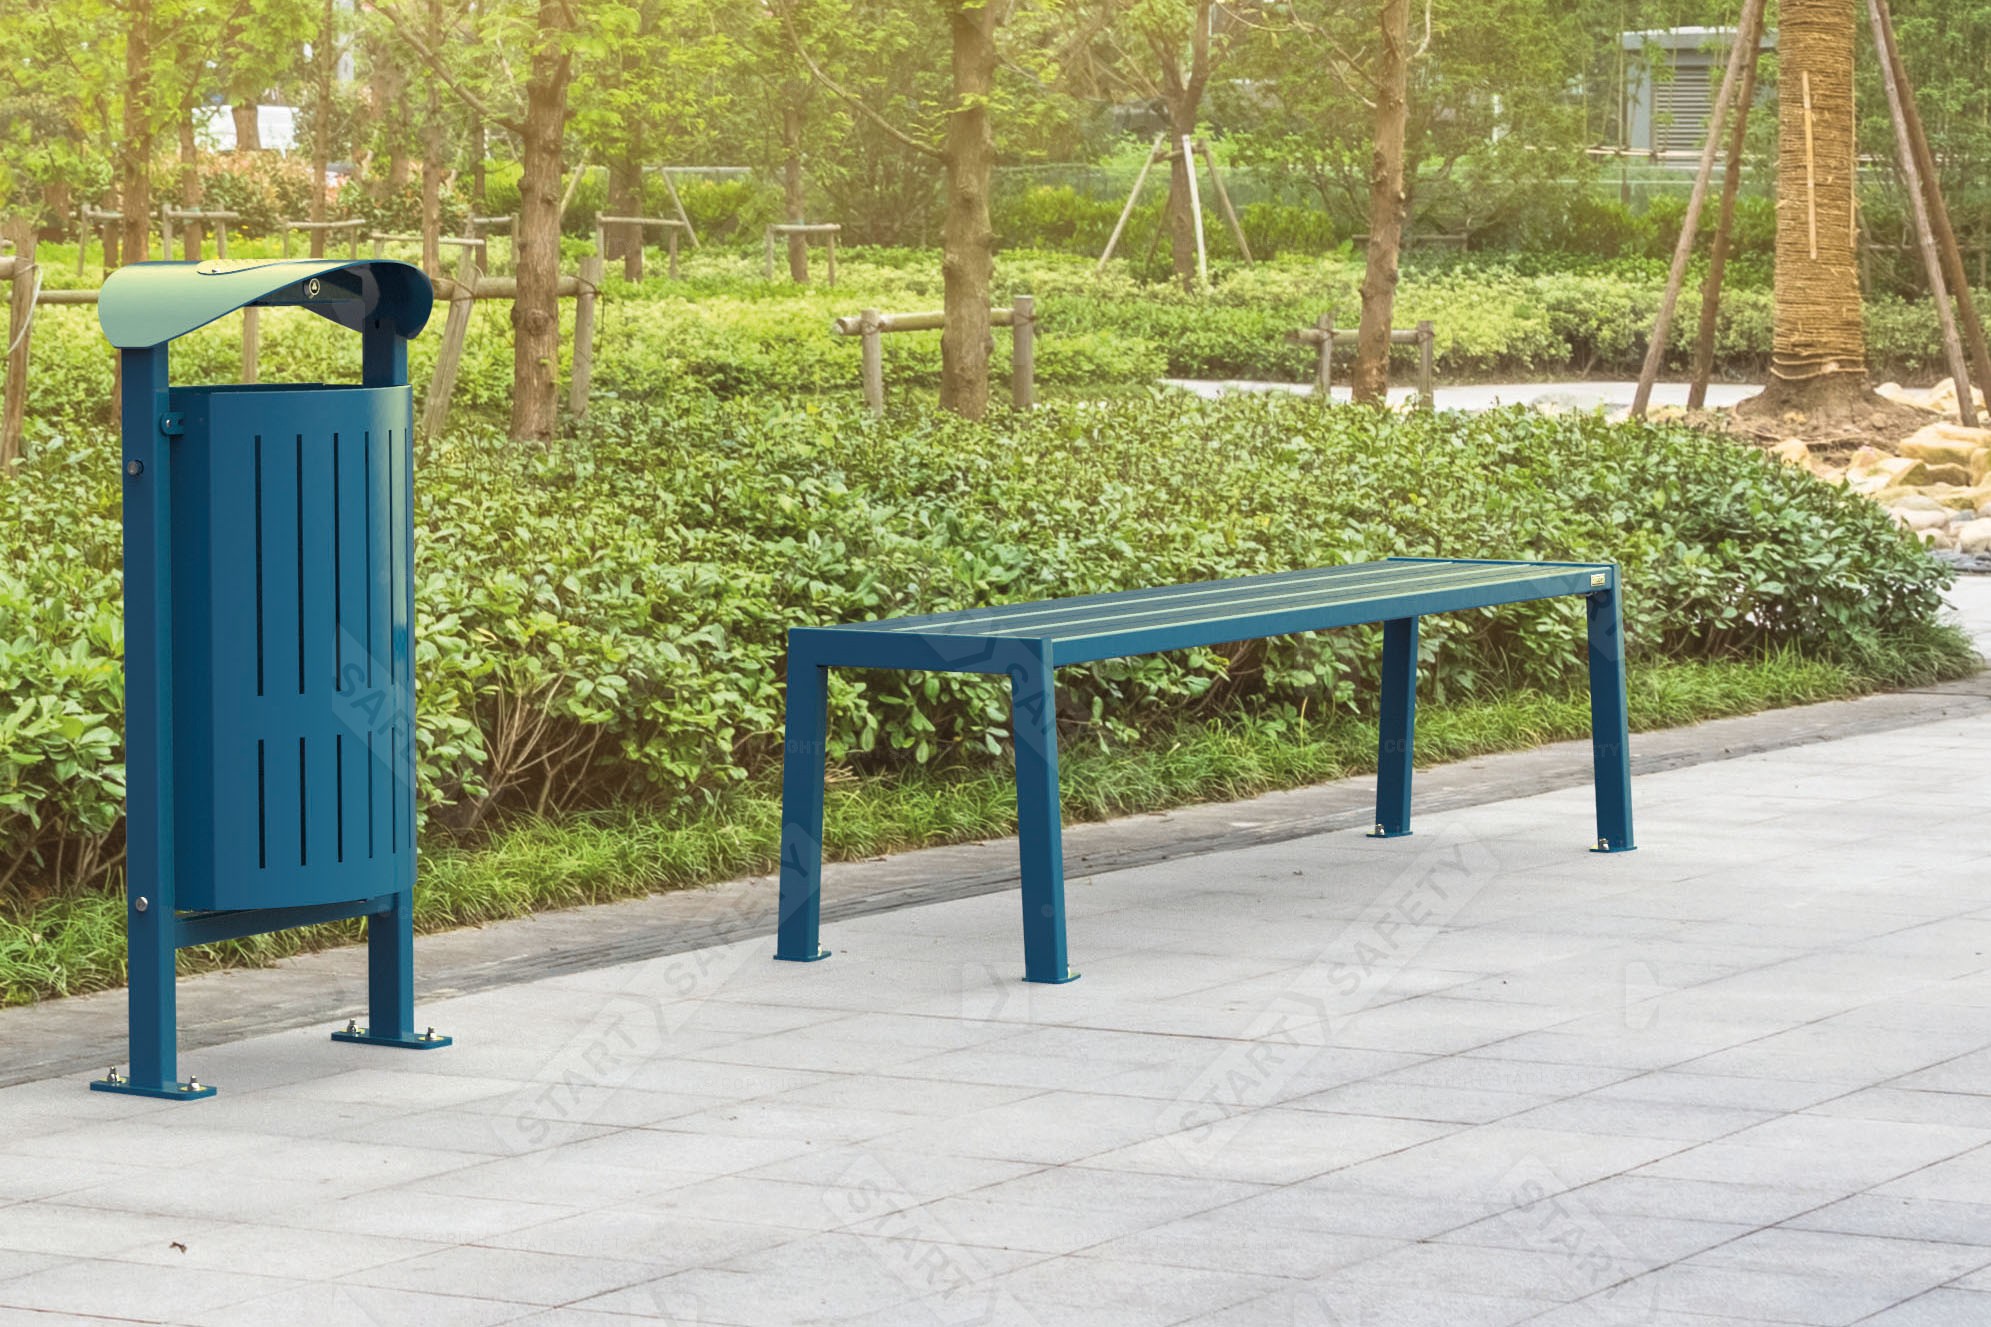 Procity Silaos Litter Bin In Green Full Steel Installed With a Procity Backless Bench In Green